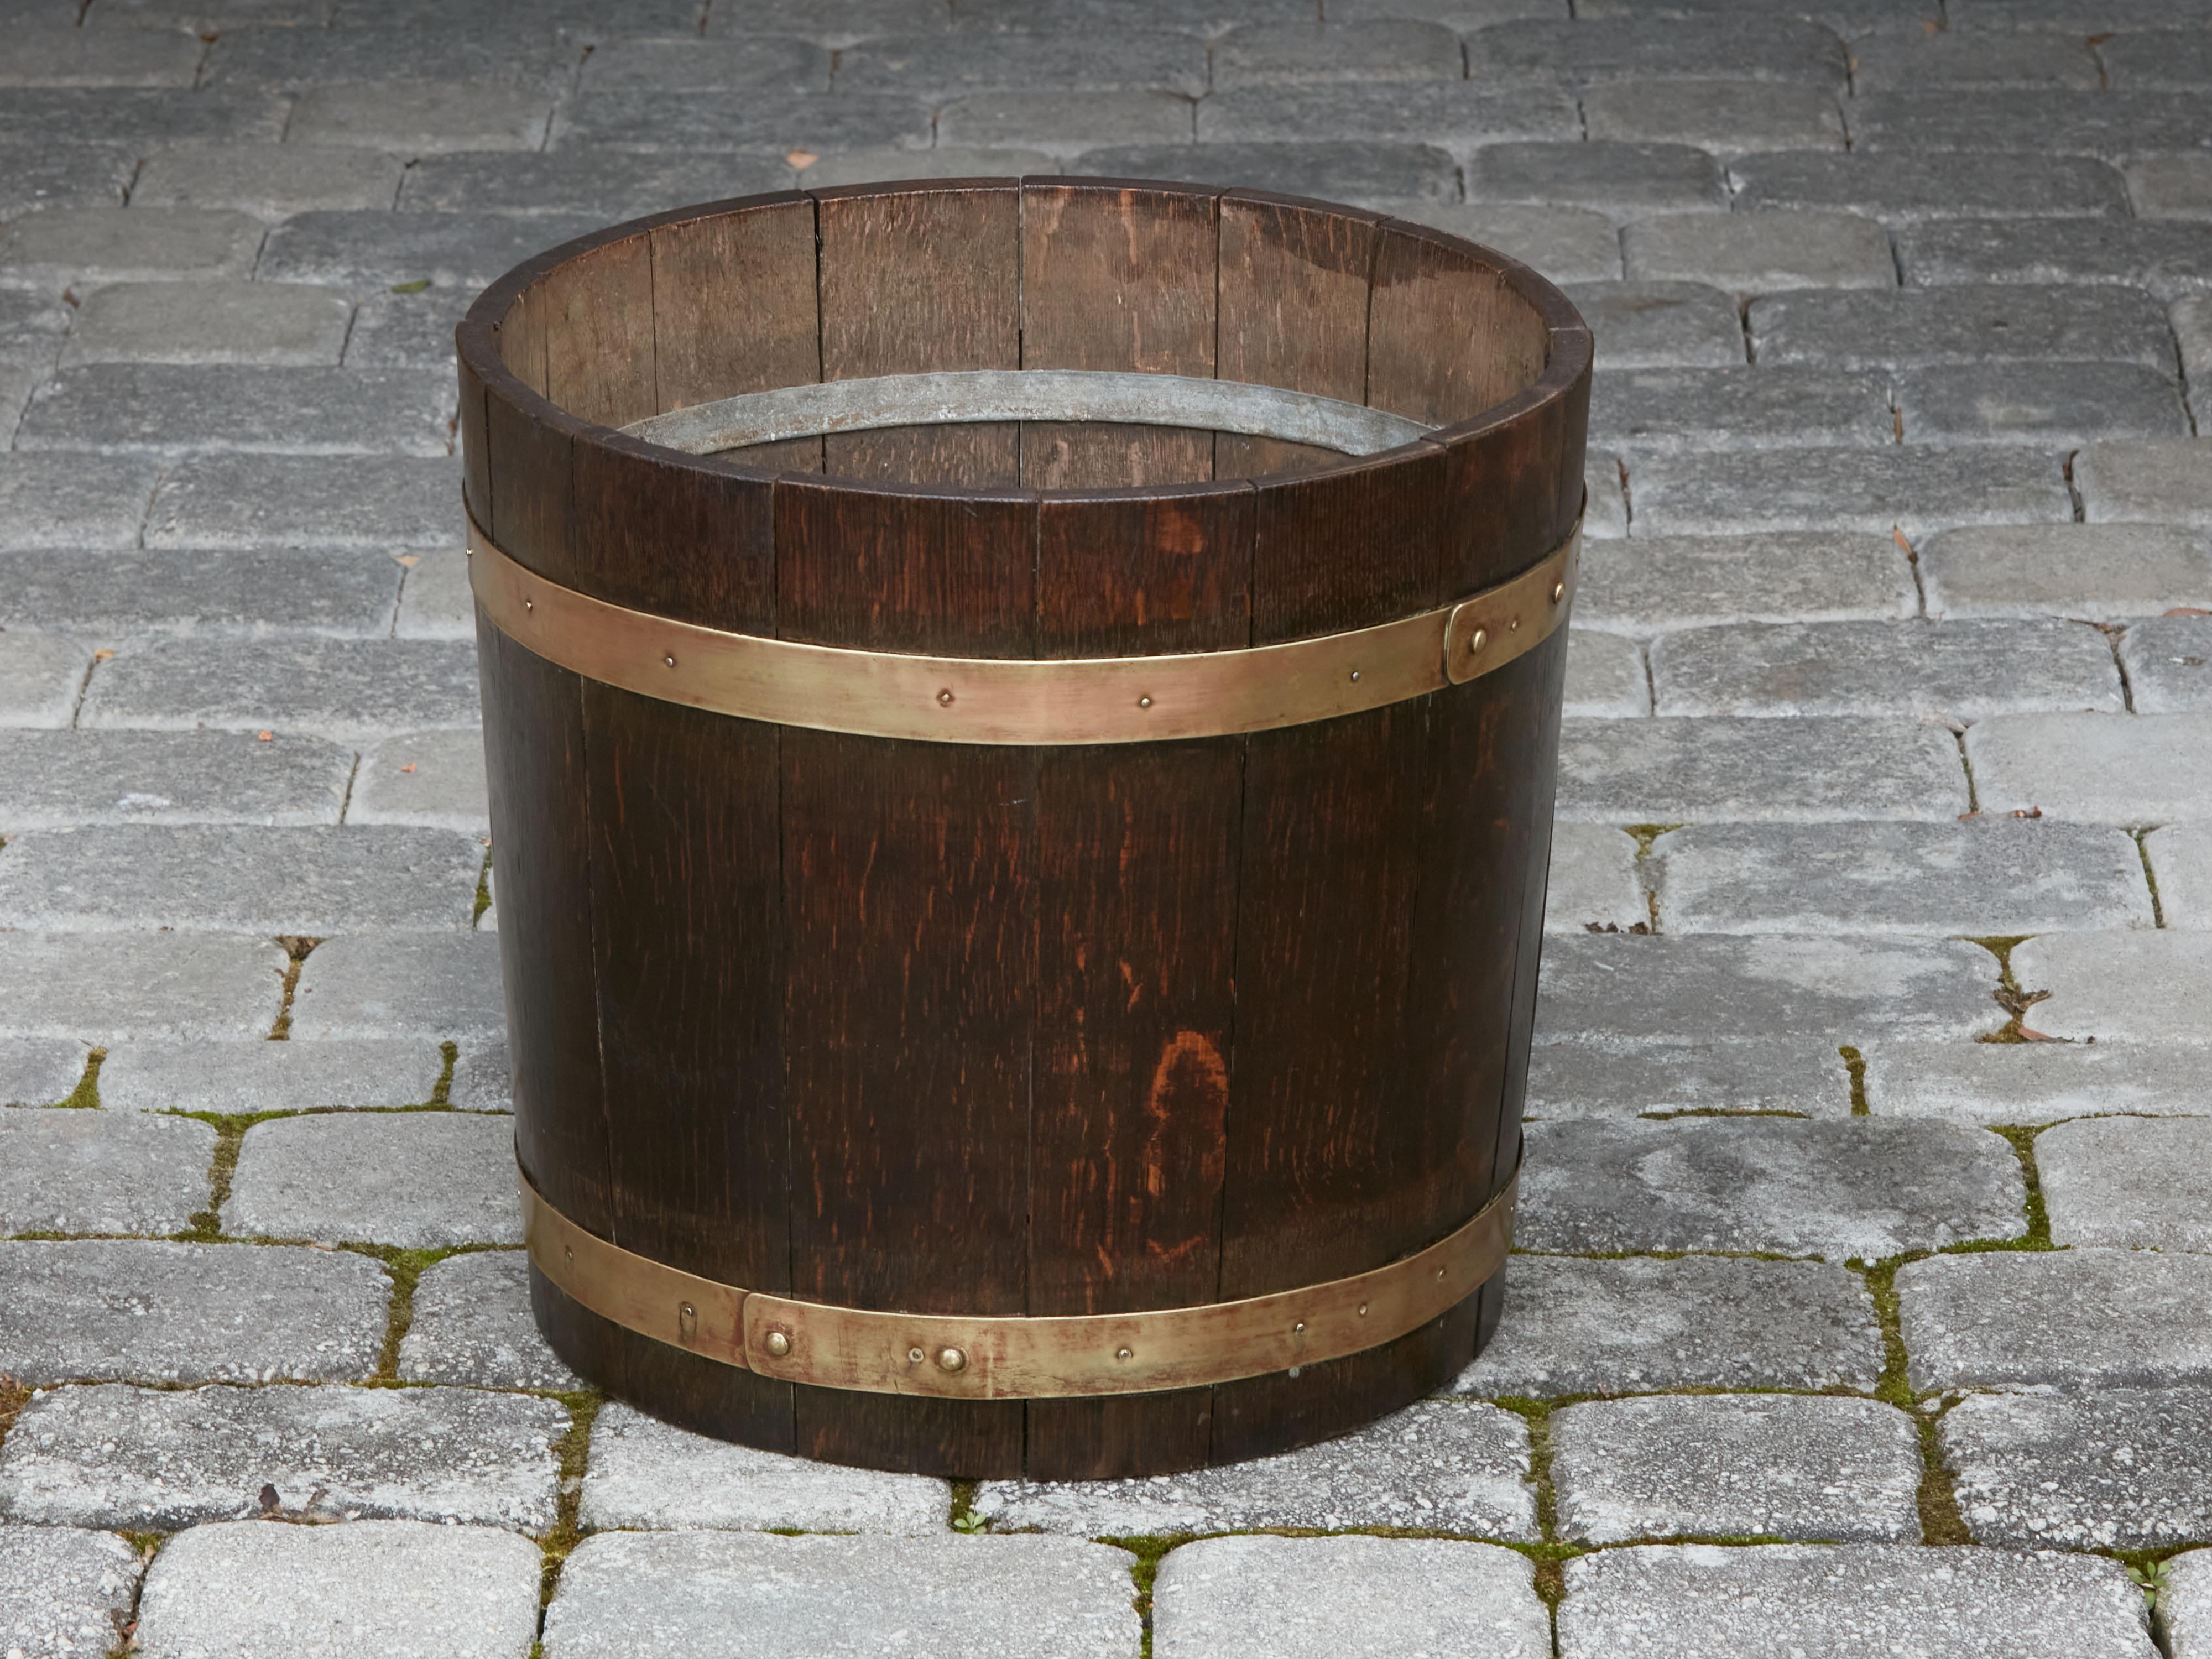 An English rustic oak bucket from the early 20th century, with brass braces. Created in England during the Turn of the Century, this oak bucket features a wooden slightly tapering structure strengthened with horizontal brass braces. With its clean